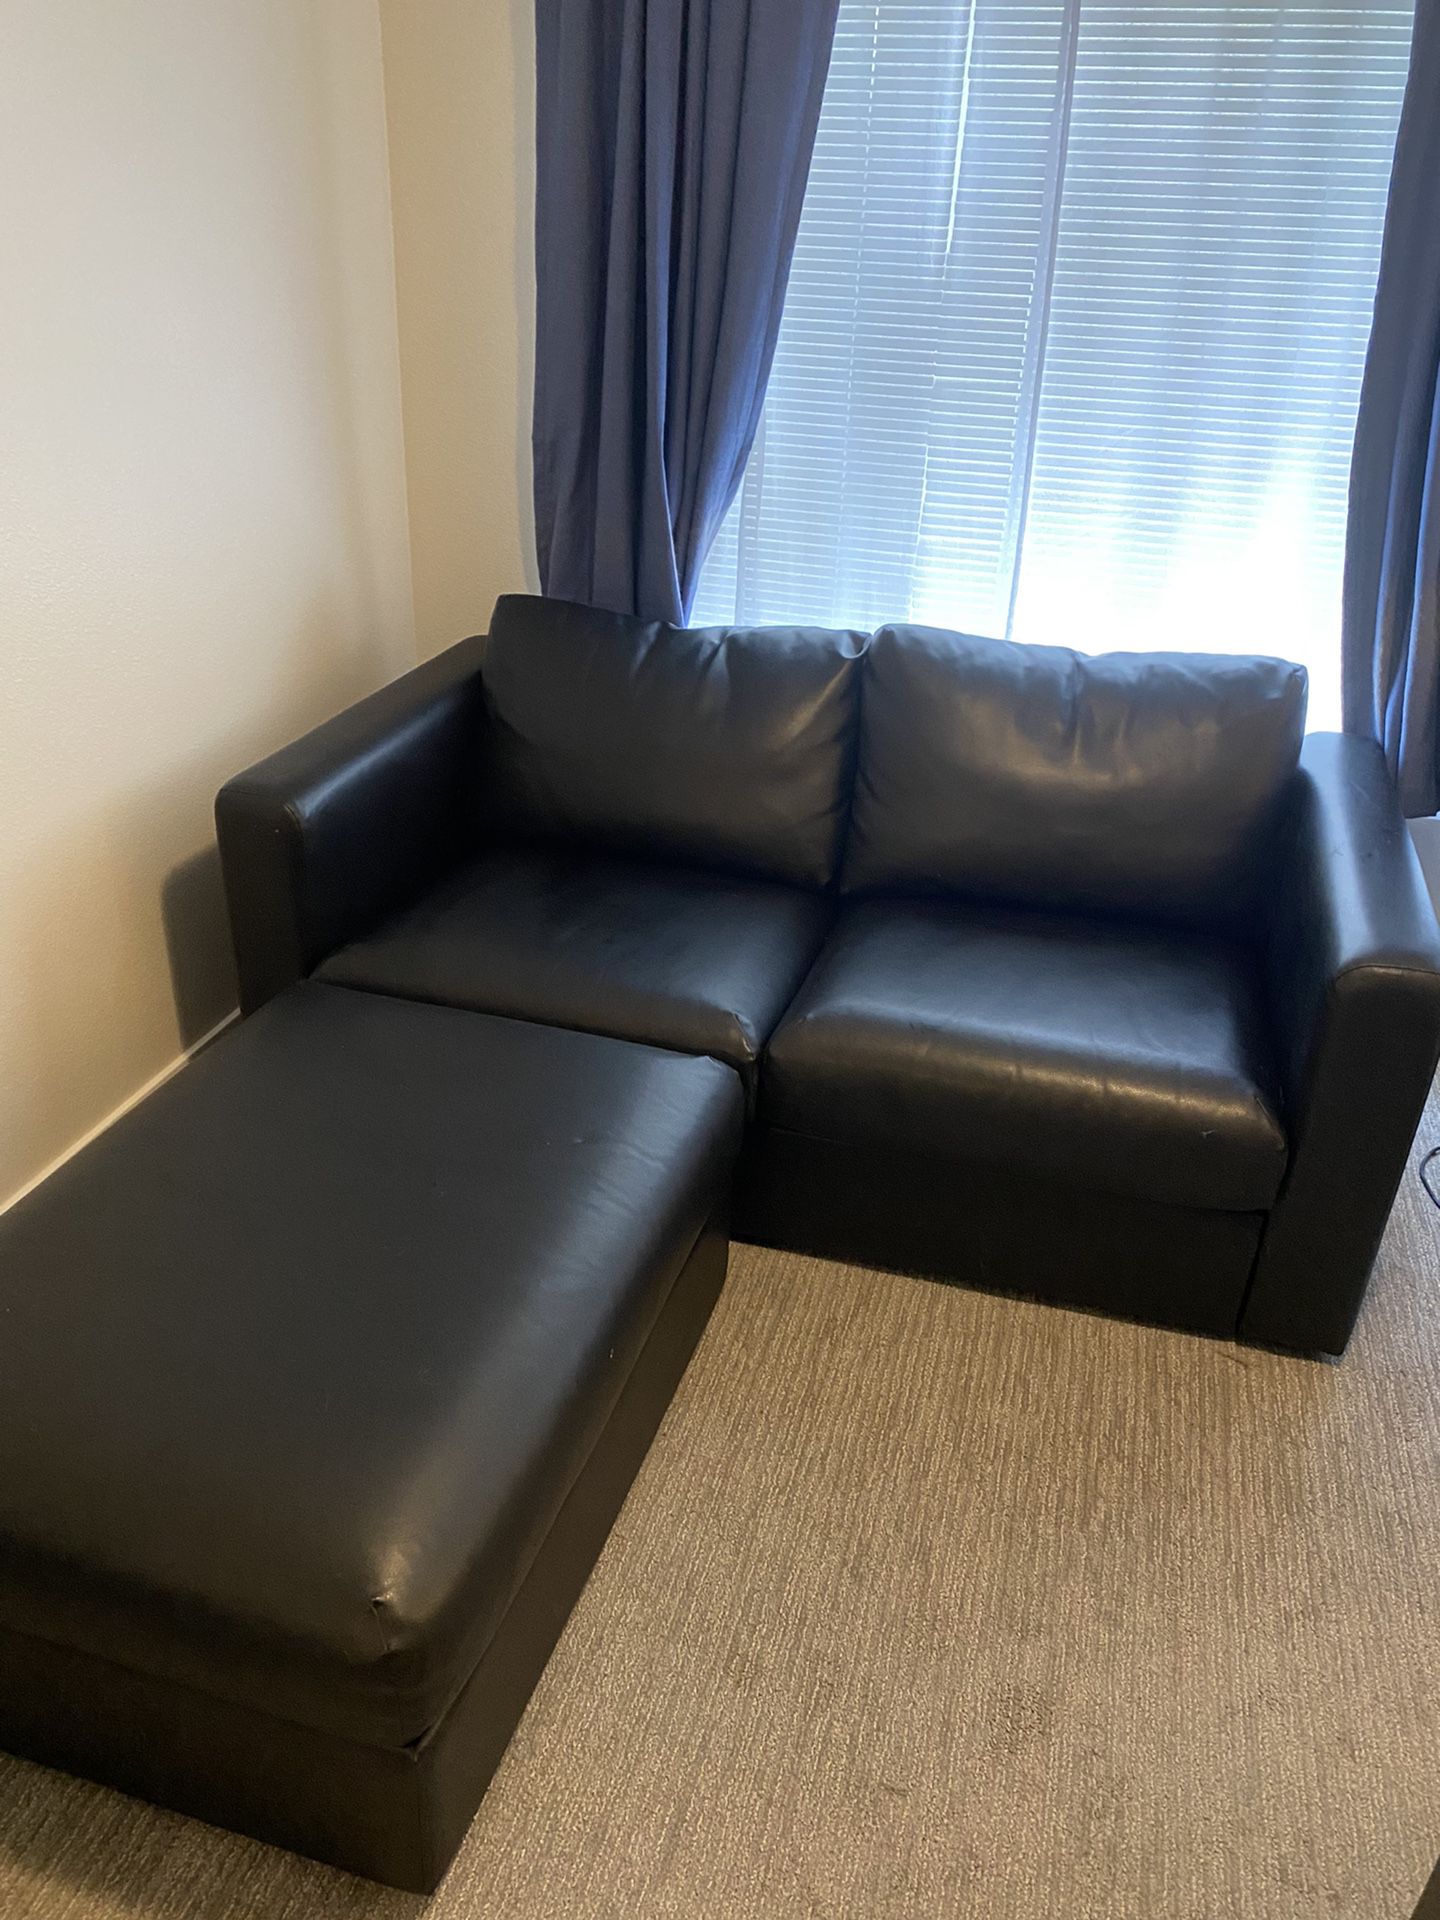 IKEA Loveseat & Storage Ottoman - WILL DELIVER IN SEATTLE ON 9/25 